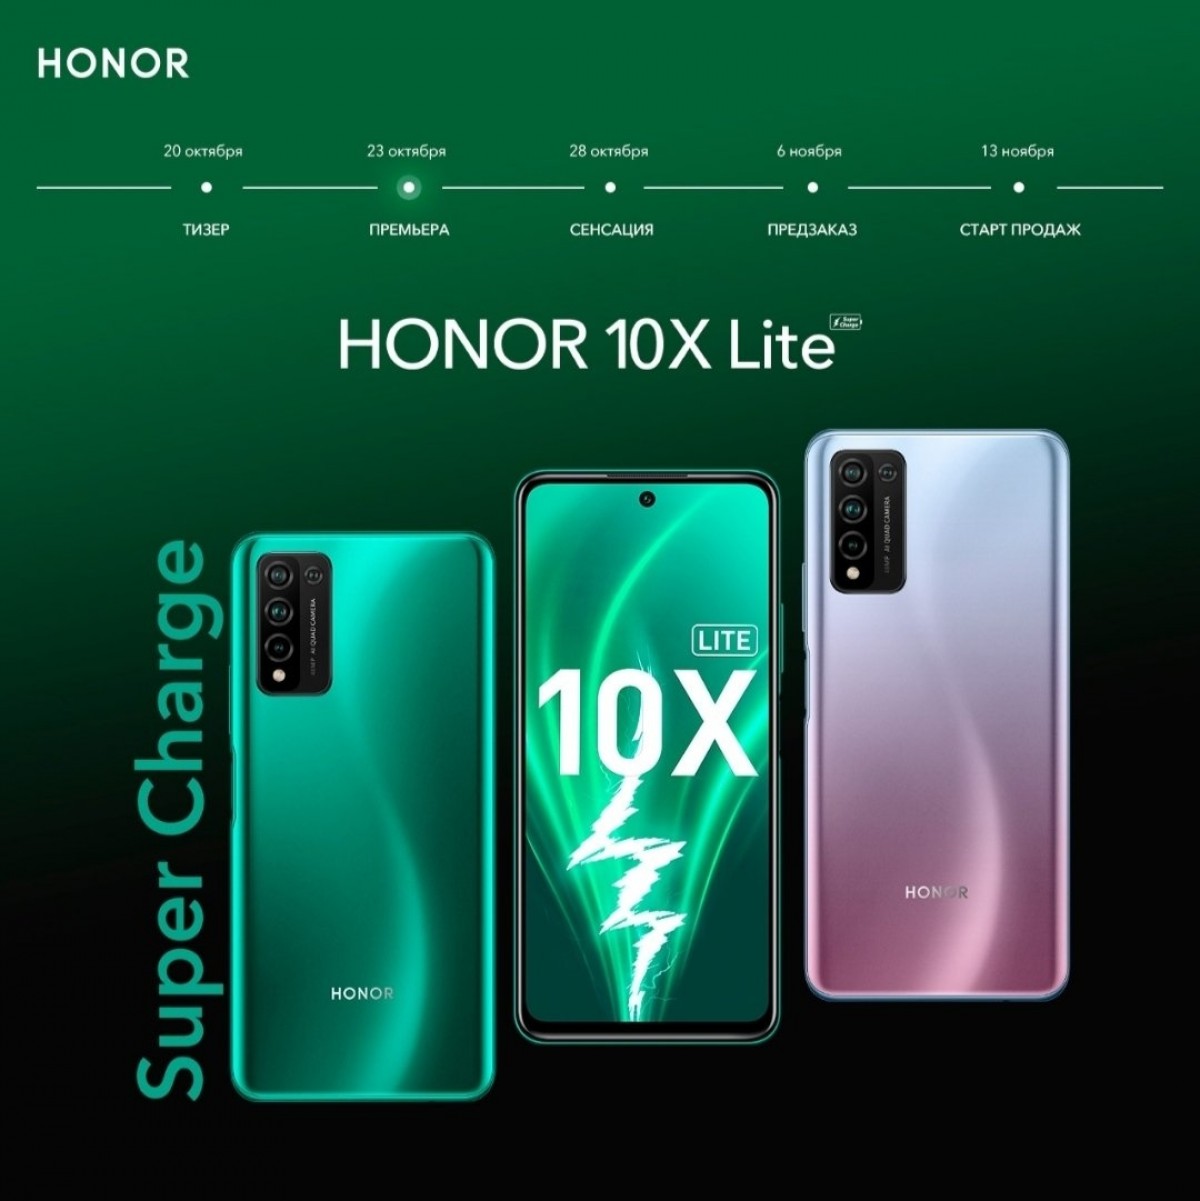 Honor X10 Lite with a 6.67-inch display and 48MP Quad-Camera Setup Launches in Saudi Arabia